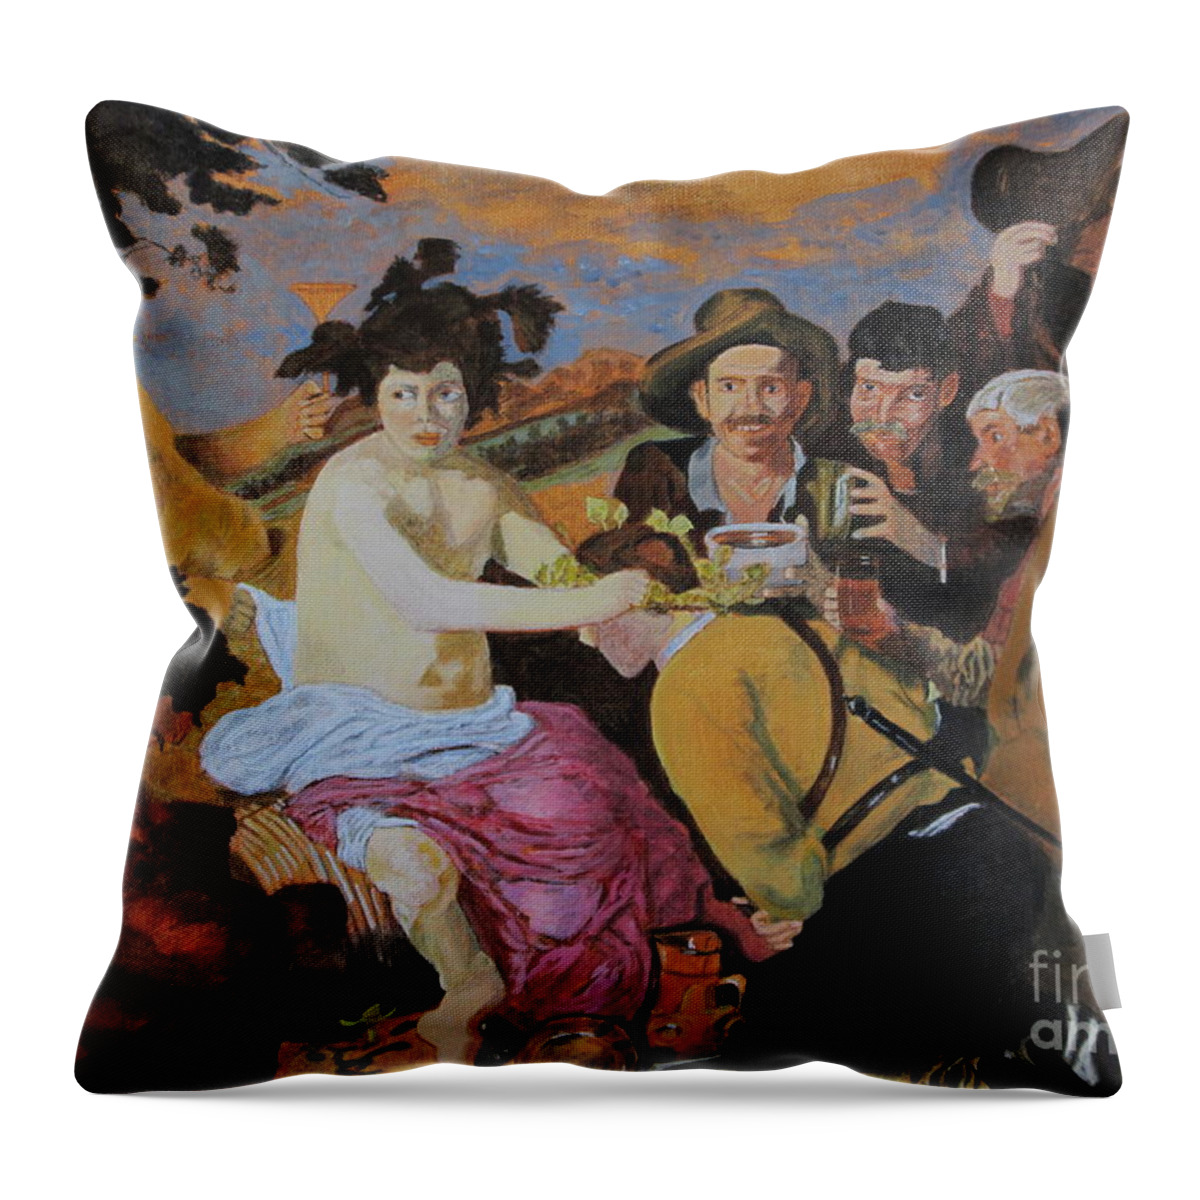 After Velazques Throw Pillow featuring the painting After Velazquez by Edward McNaught-Davis